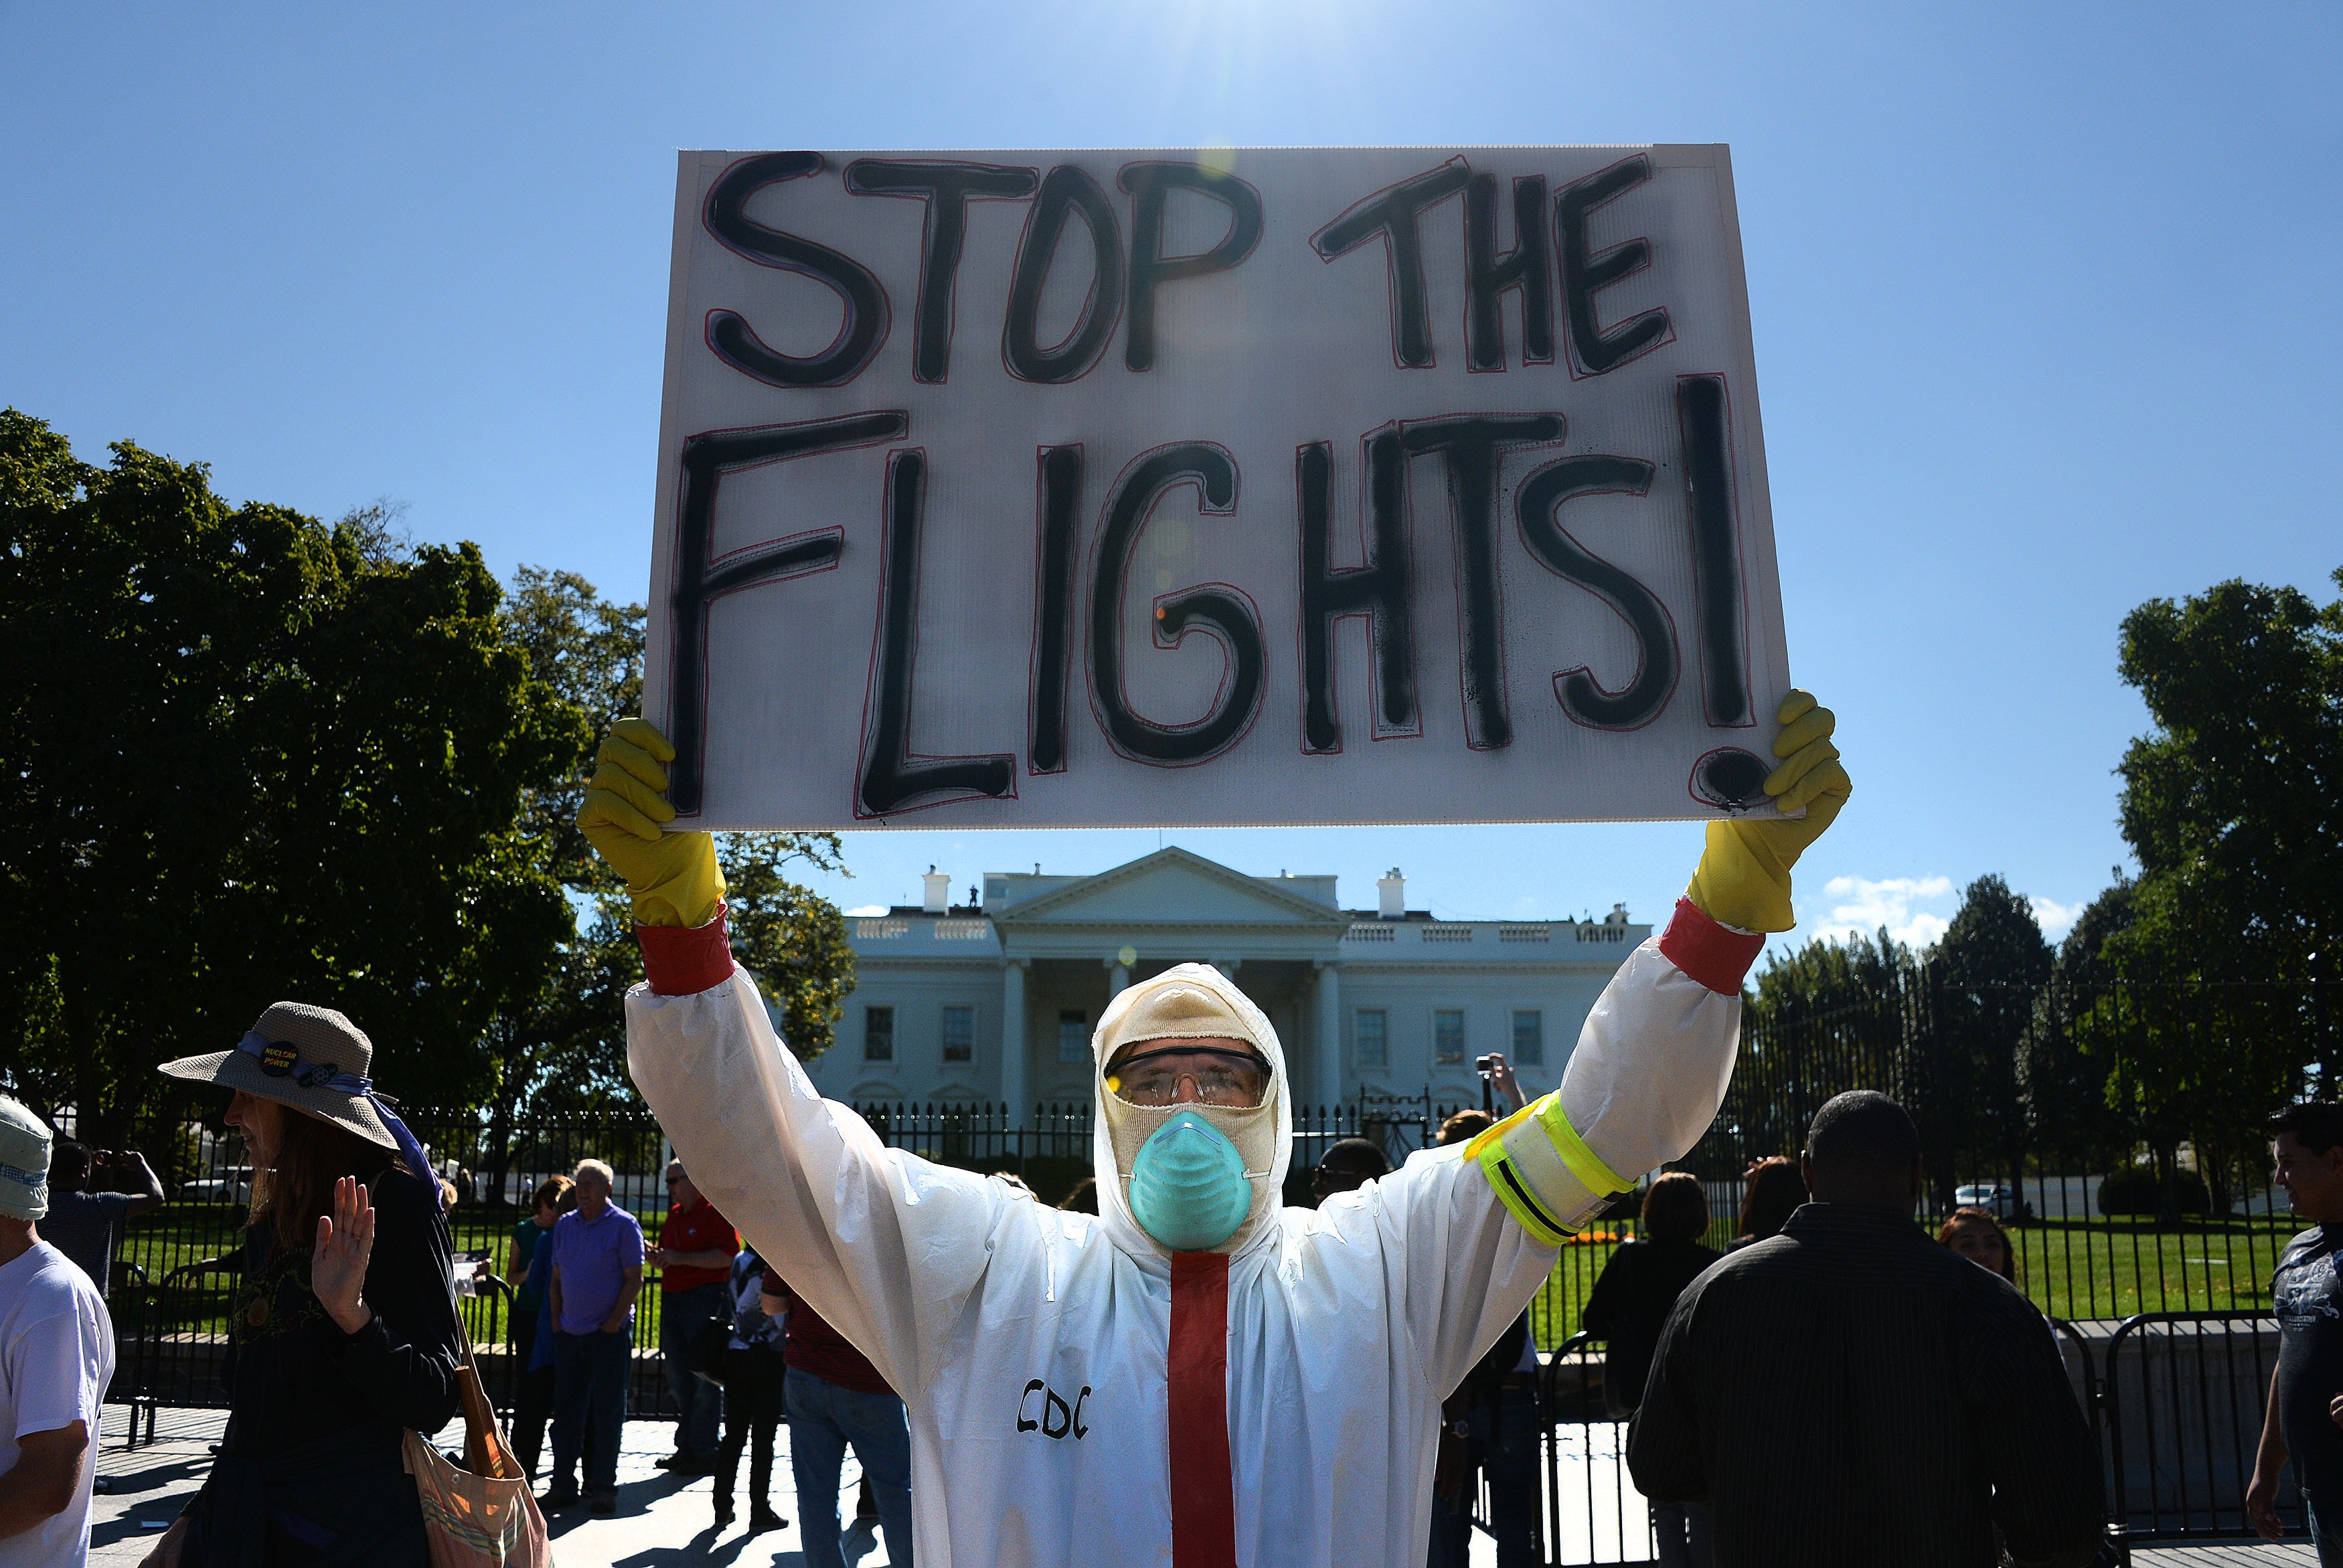 A protester stands outside the White House asking President Barack Obama to ban flights in effort to stop Ebola on Oct. 17, 2014 in Washington, DC. (Olivier Douliery—dpa/Corbis)